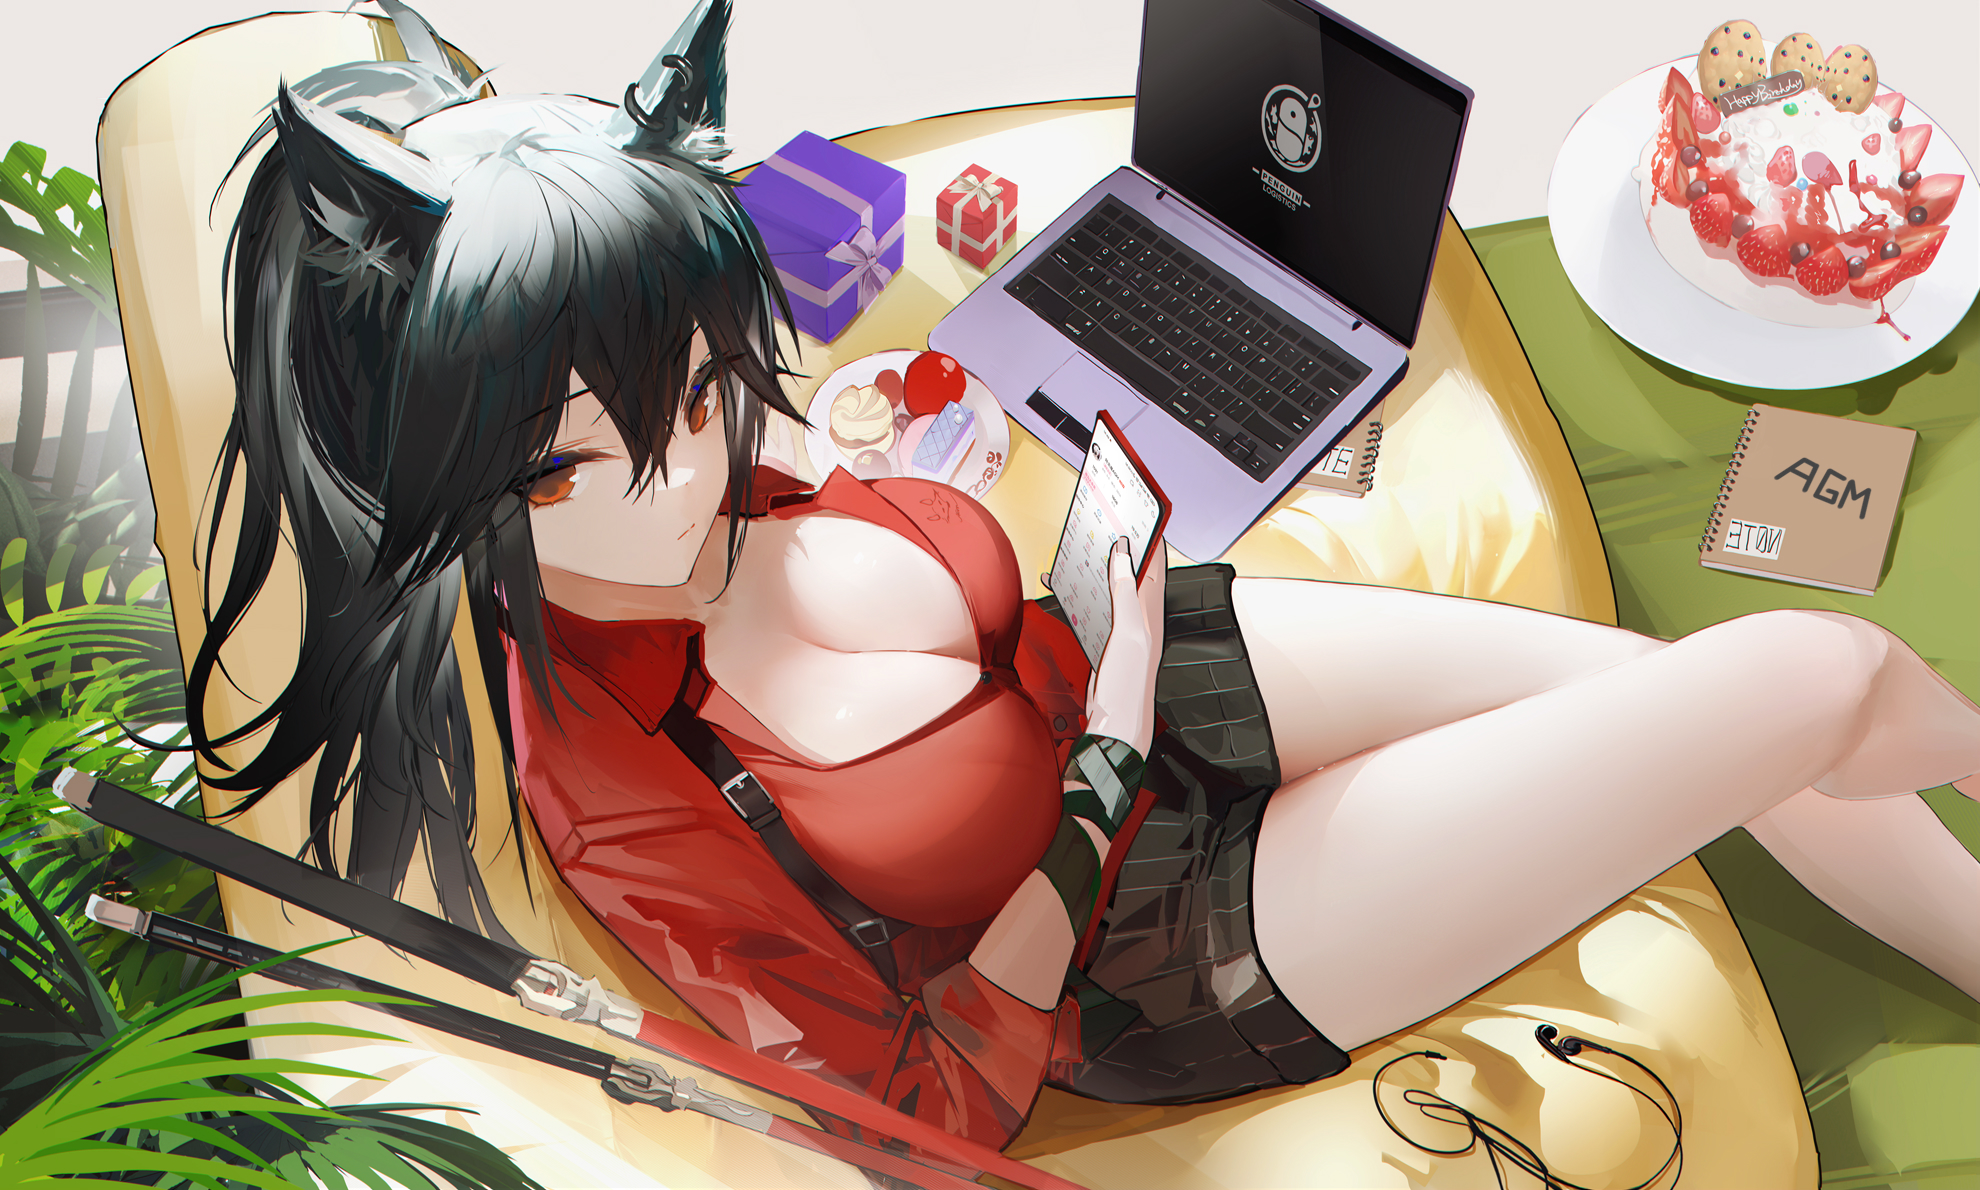 Anime 1980x1190 Arknights Texas (Arknights) Omone Hokoma Agm anime girls cleavage animal ears red eyes laptop sweets cake cookies strawberries video game characters video game girls black hair wolf girls high angle